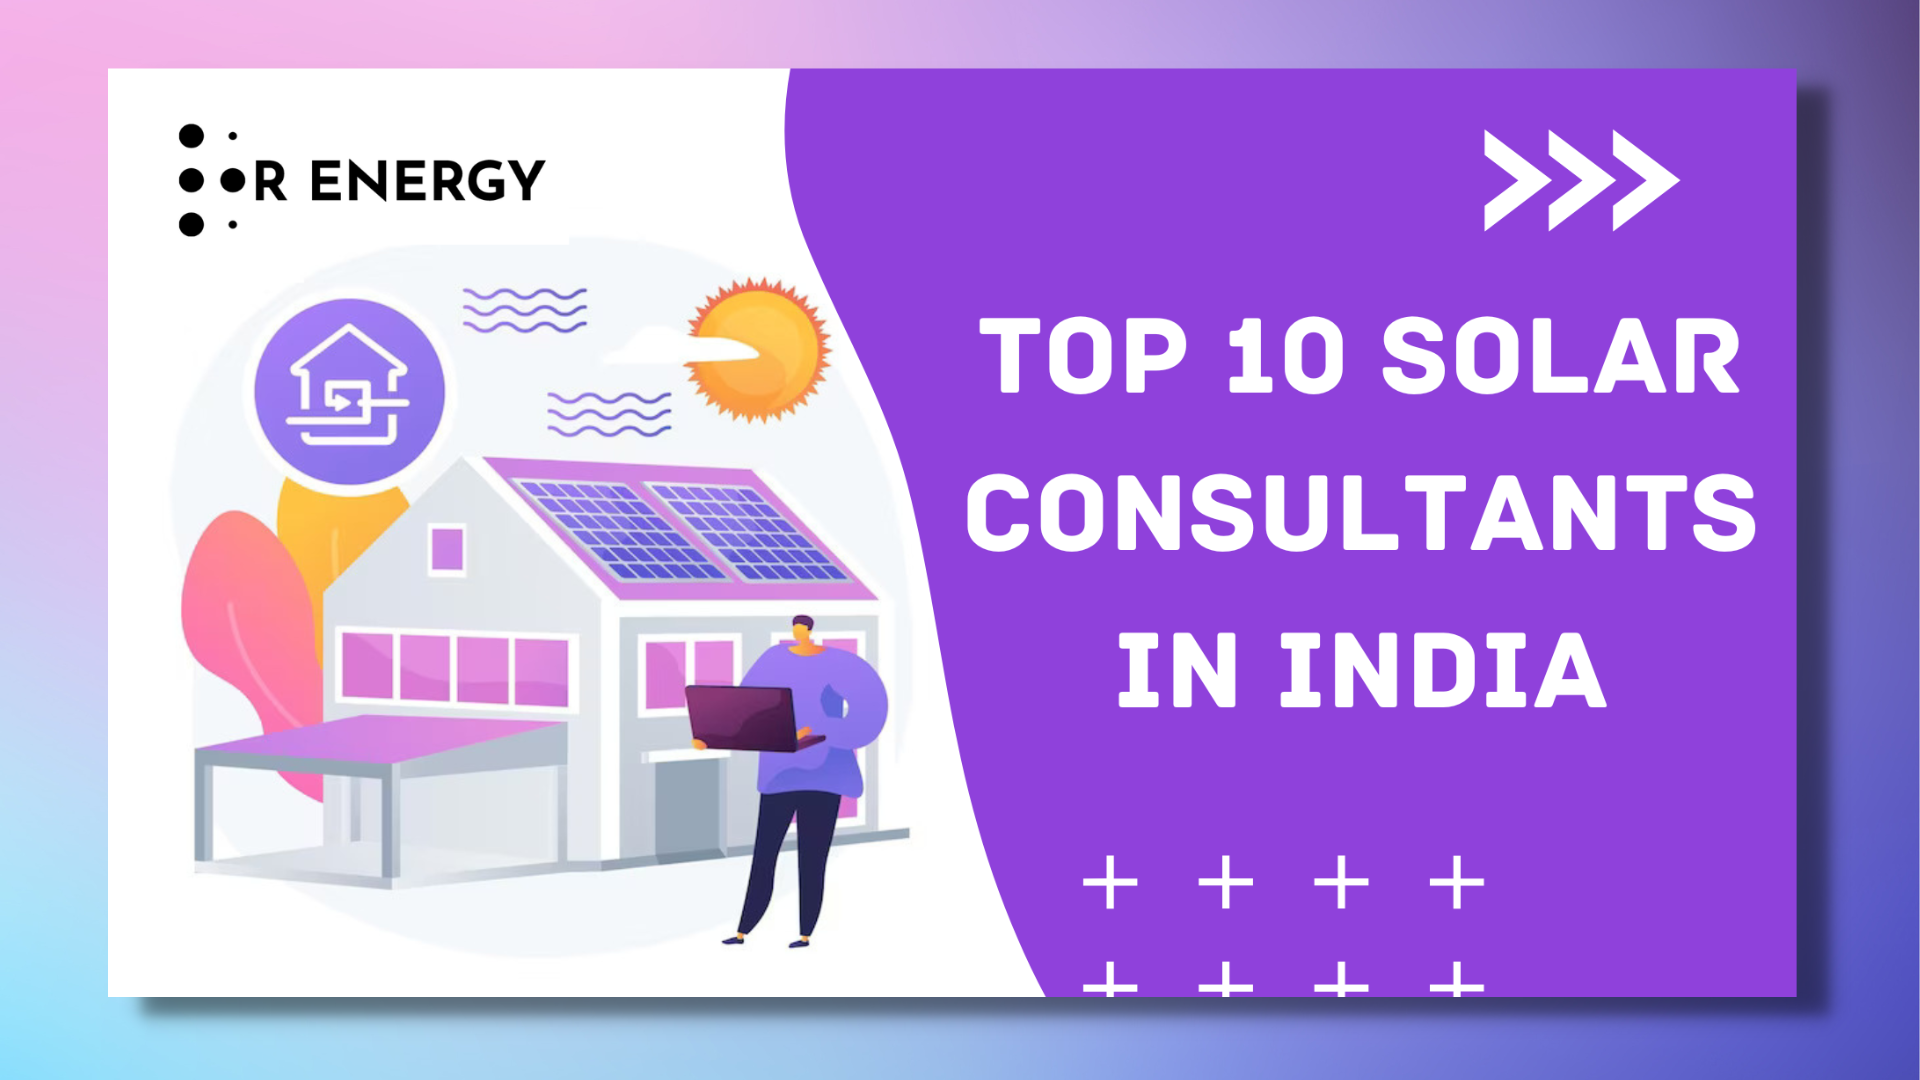 https://renergyinfo.com/top-solar-consultancies-currently-available-in-indian-market/